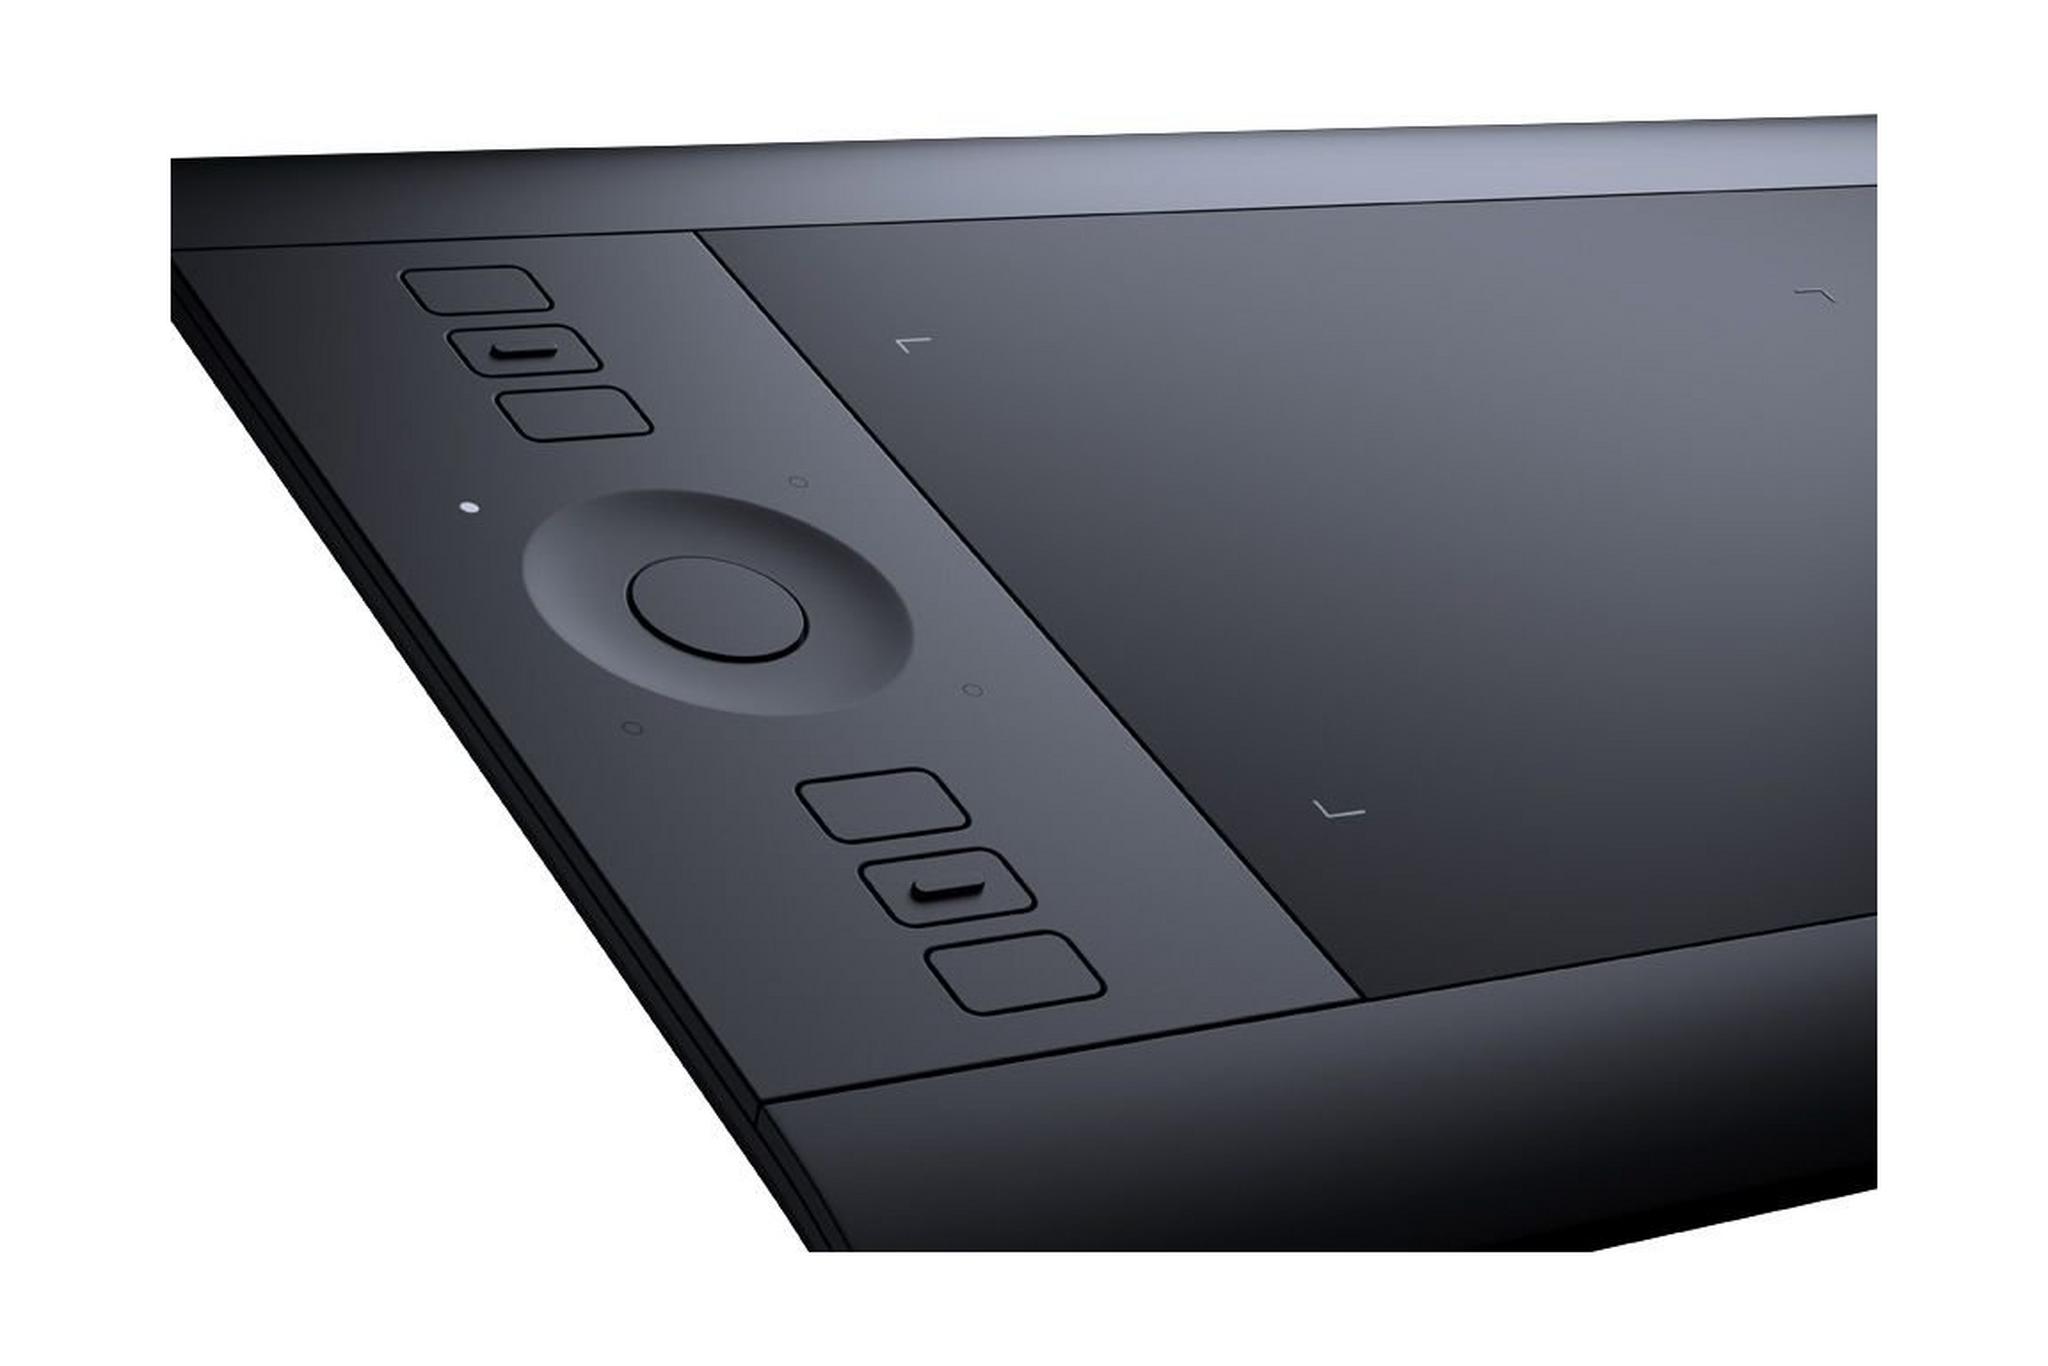 WACOM Intuos 6.1-inch - Wi-Fi Only Tablet - Black